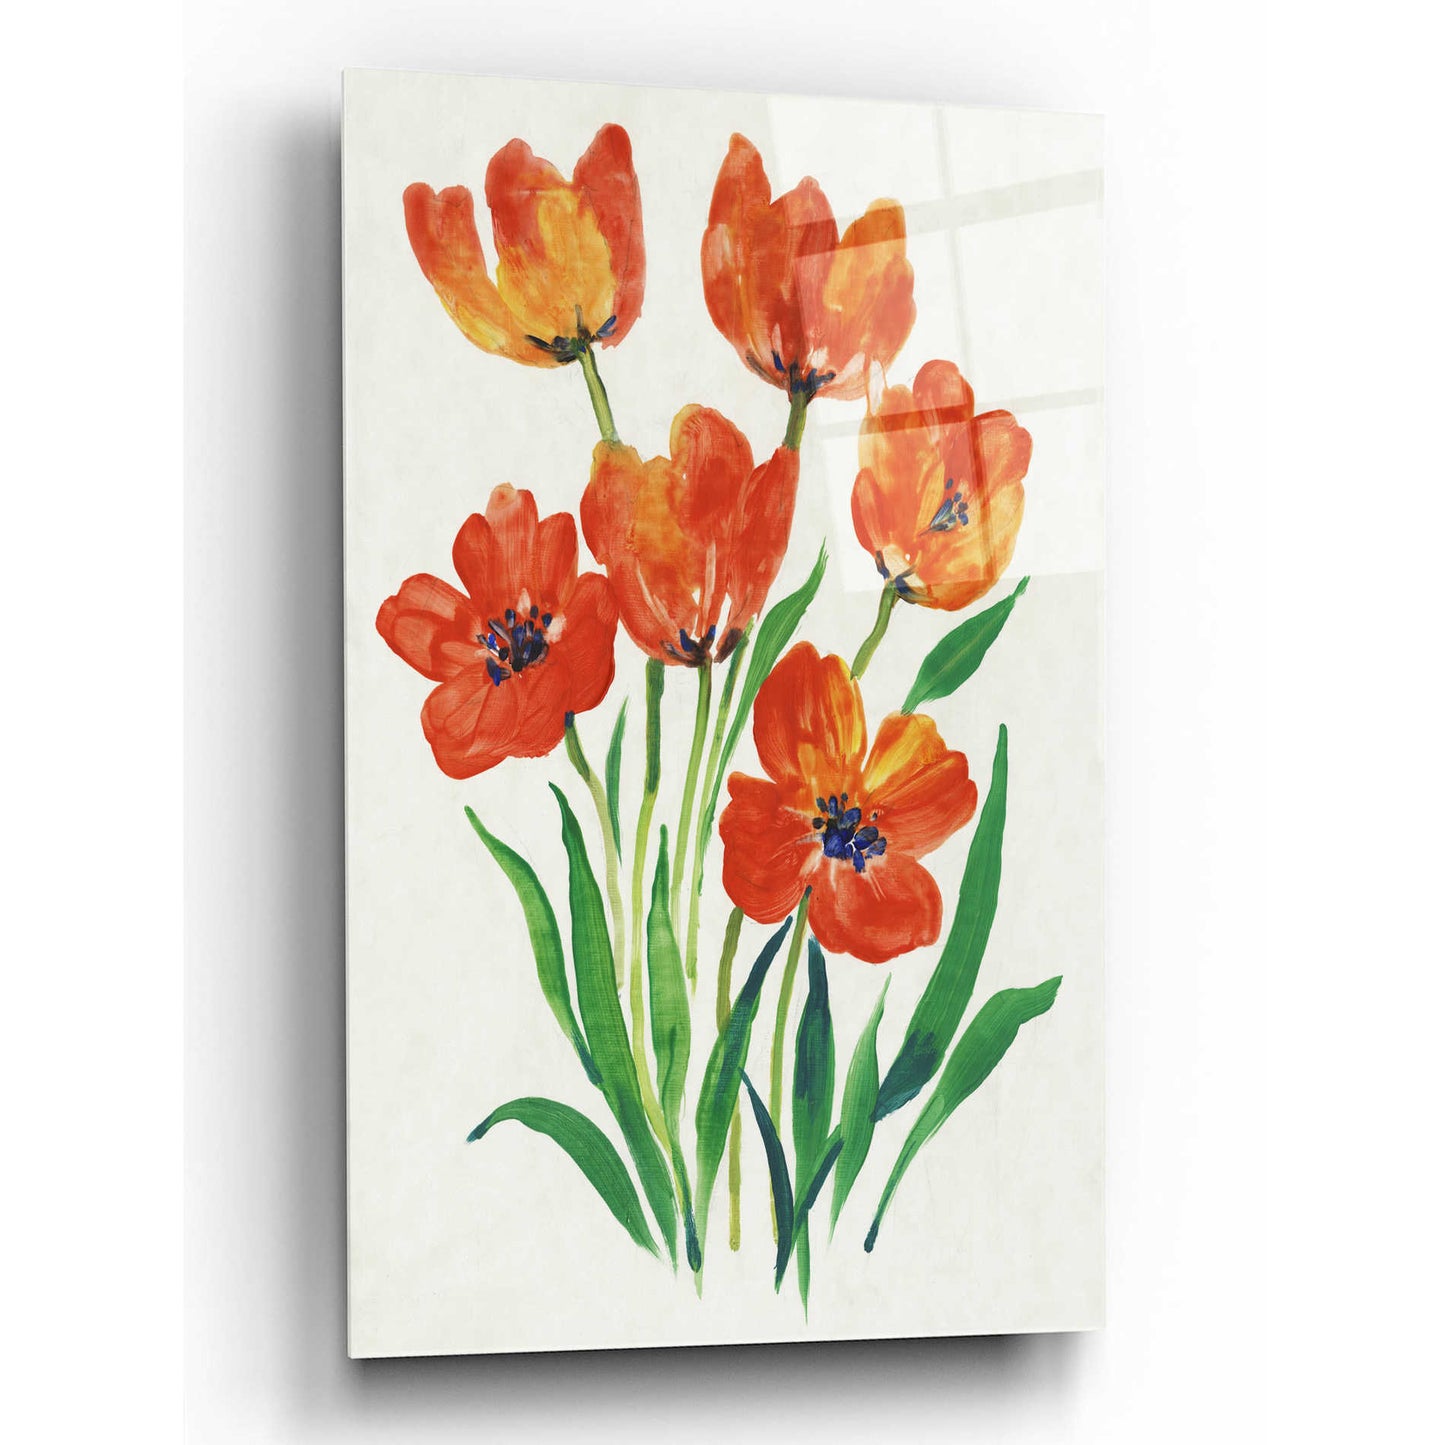 Epic Art 'Red Tulips in Bloom II' by Tim O'Toole, Acrylic Glass Wall Art